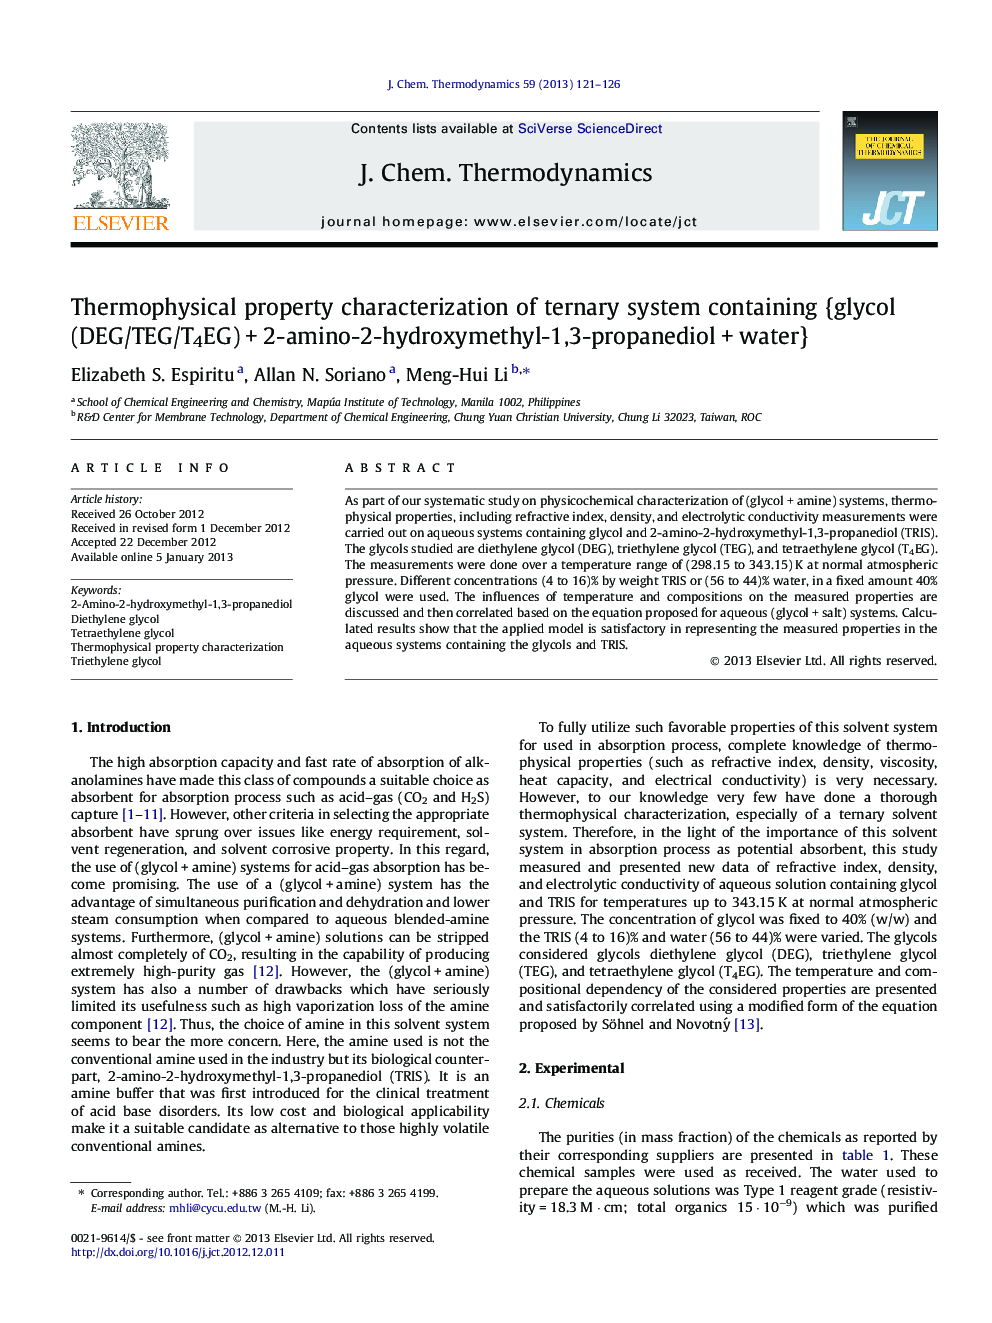 Thermophysical property characterization of ternary system containing {glycol (DEG/TEG/T4EG) + 2-amino-2-hydroxymethyl-1,3-propanediol + water}